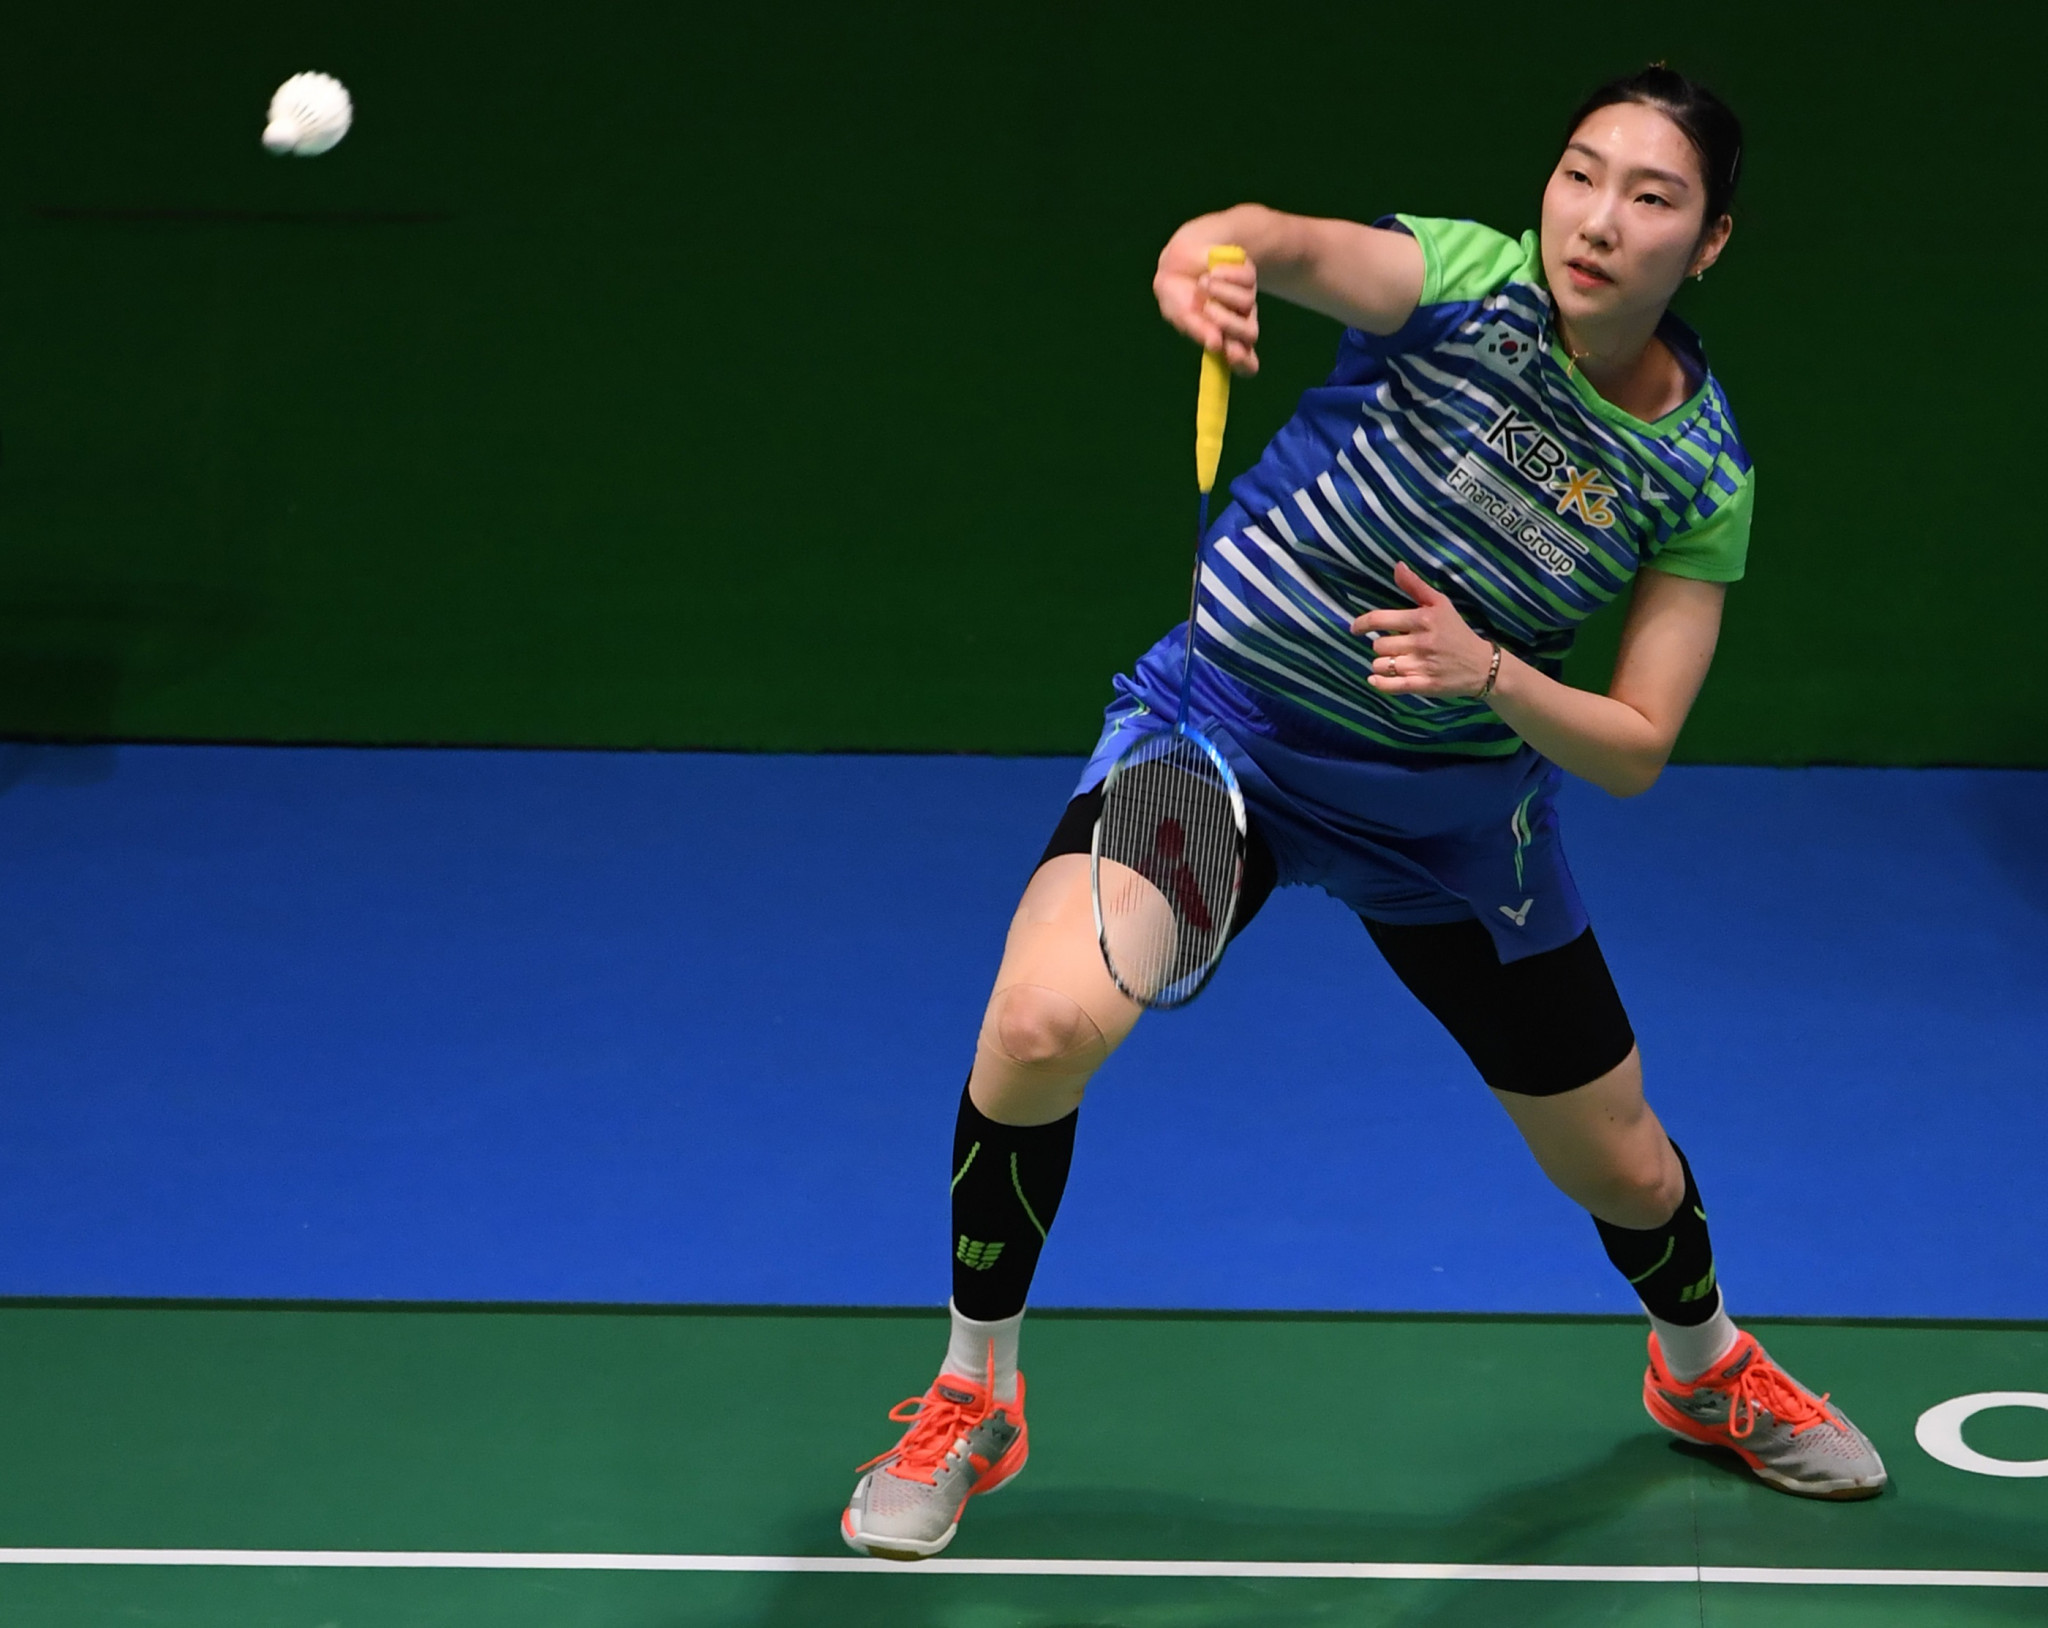 Third seed Sung Ji Hyun of South Korea suffered a surprise second-round defeat to China’s Ji Shuting today as action continued at the BWF China Open ©Getty Images